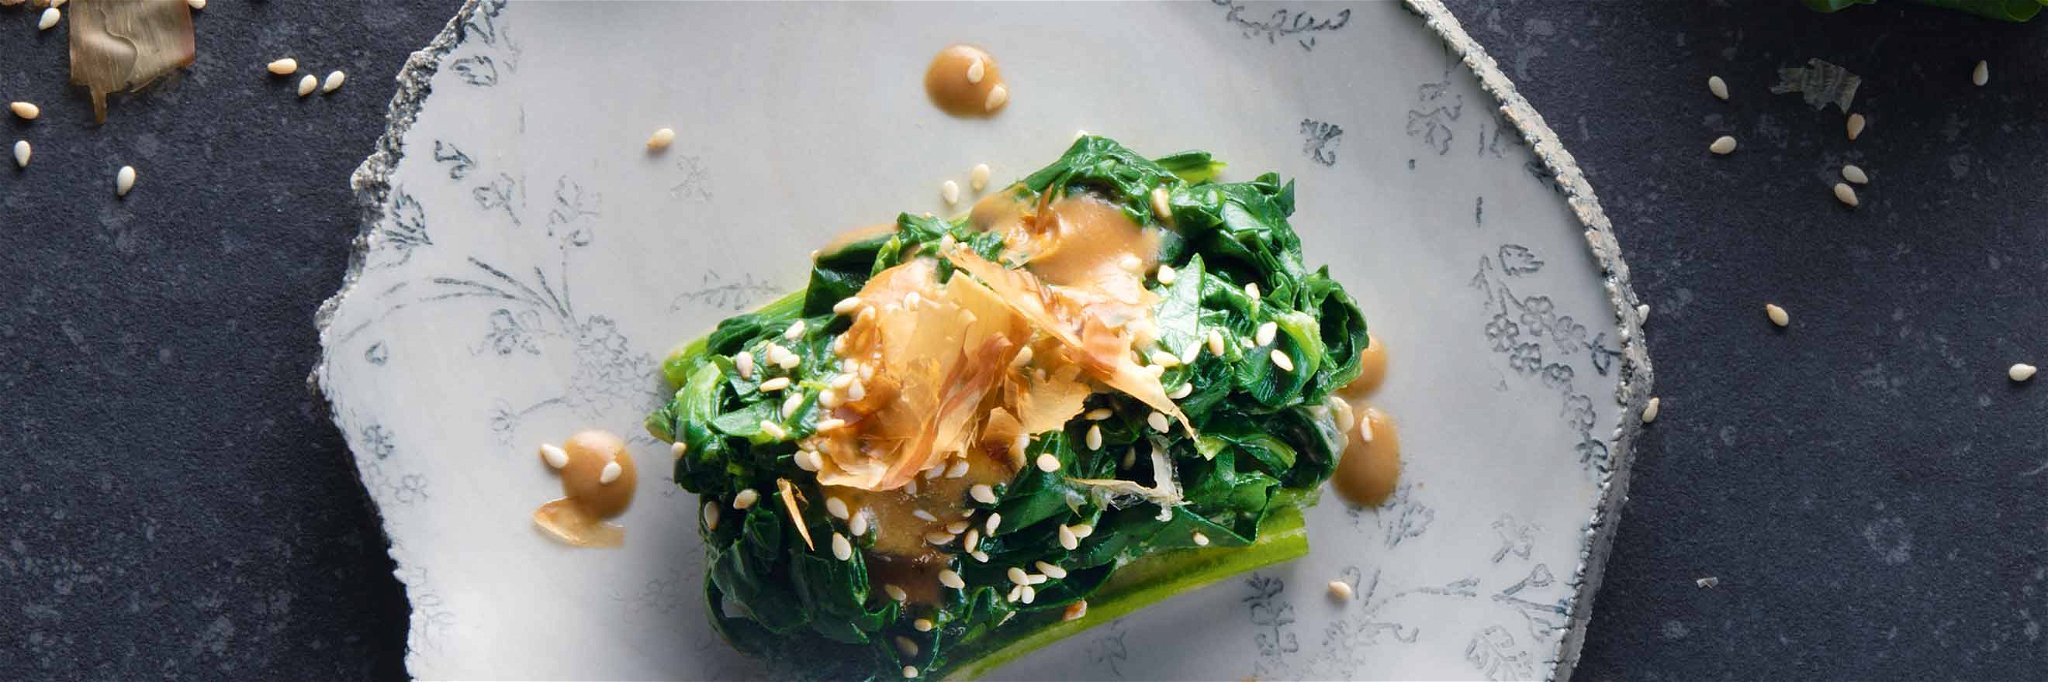 Spinach with Goma (Sesame) Dressing